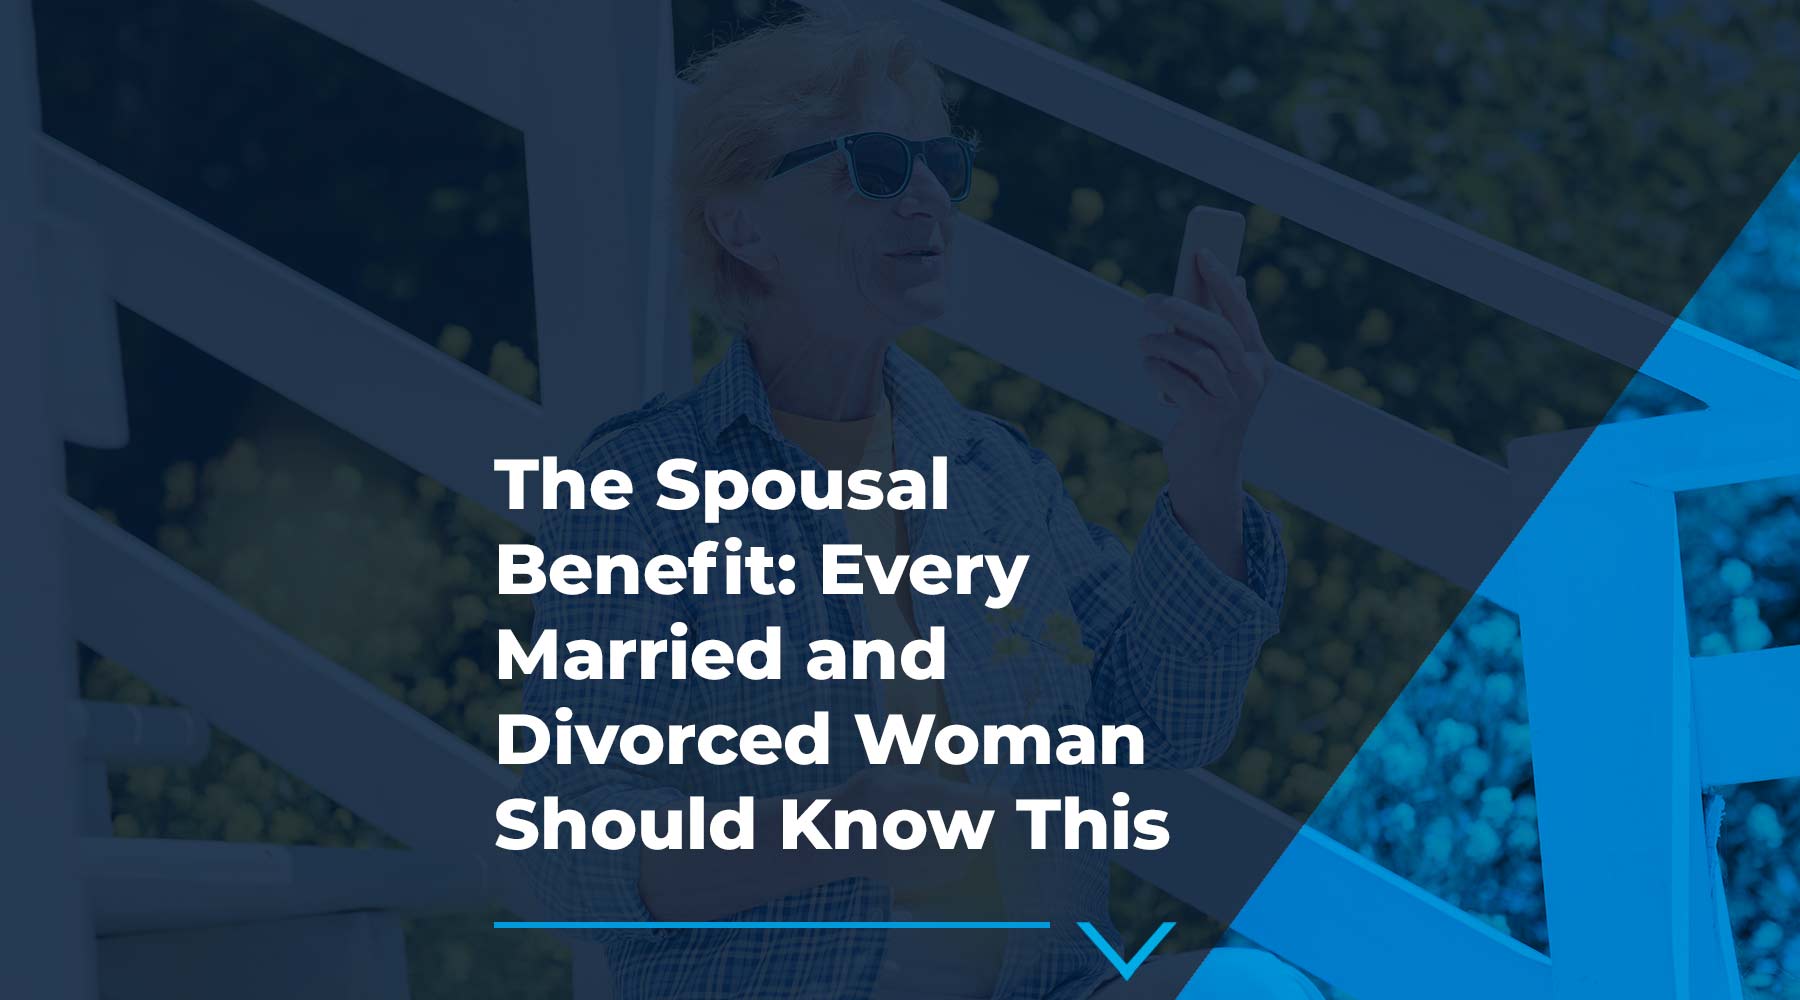 The Spousal Benefit: Every Married and Divorced Woman Should Know This